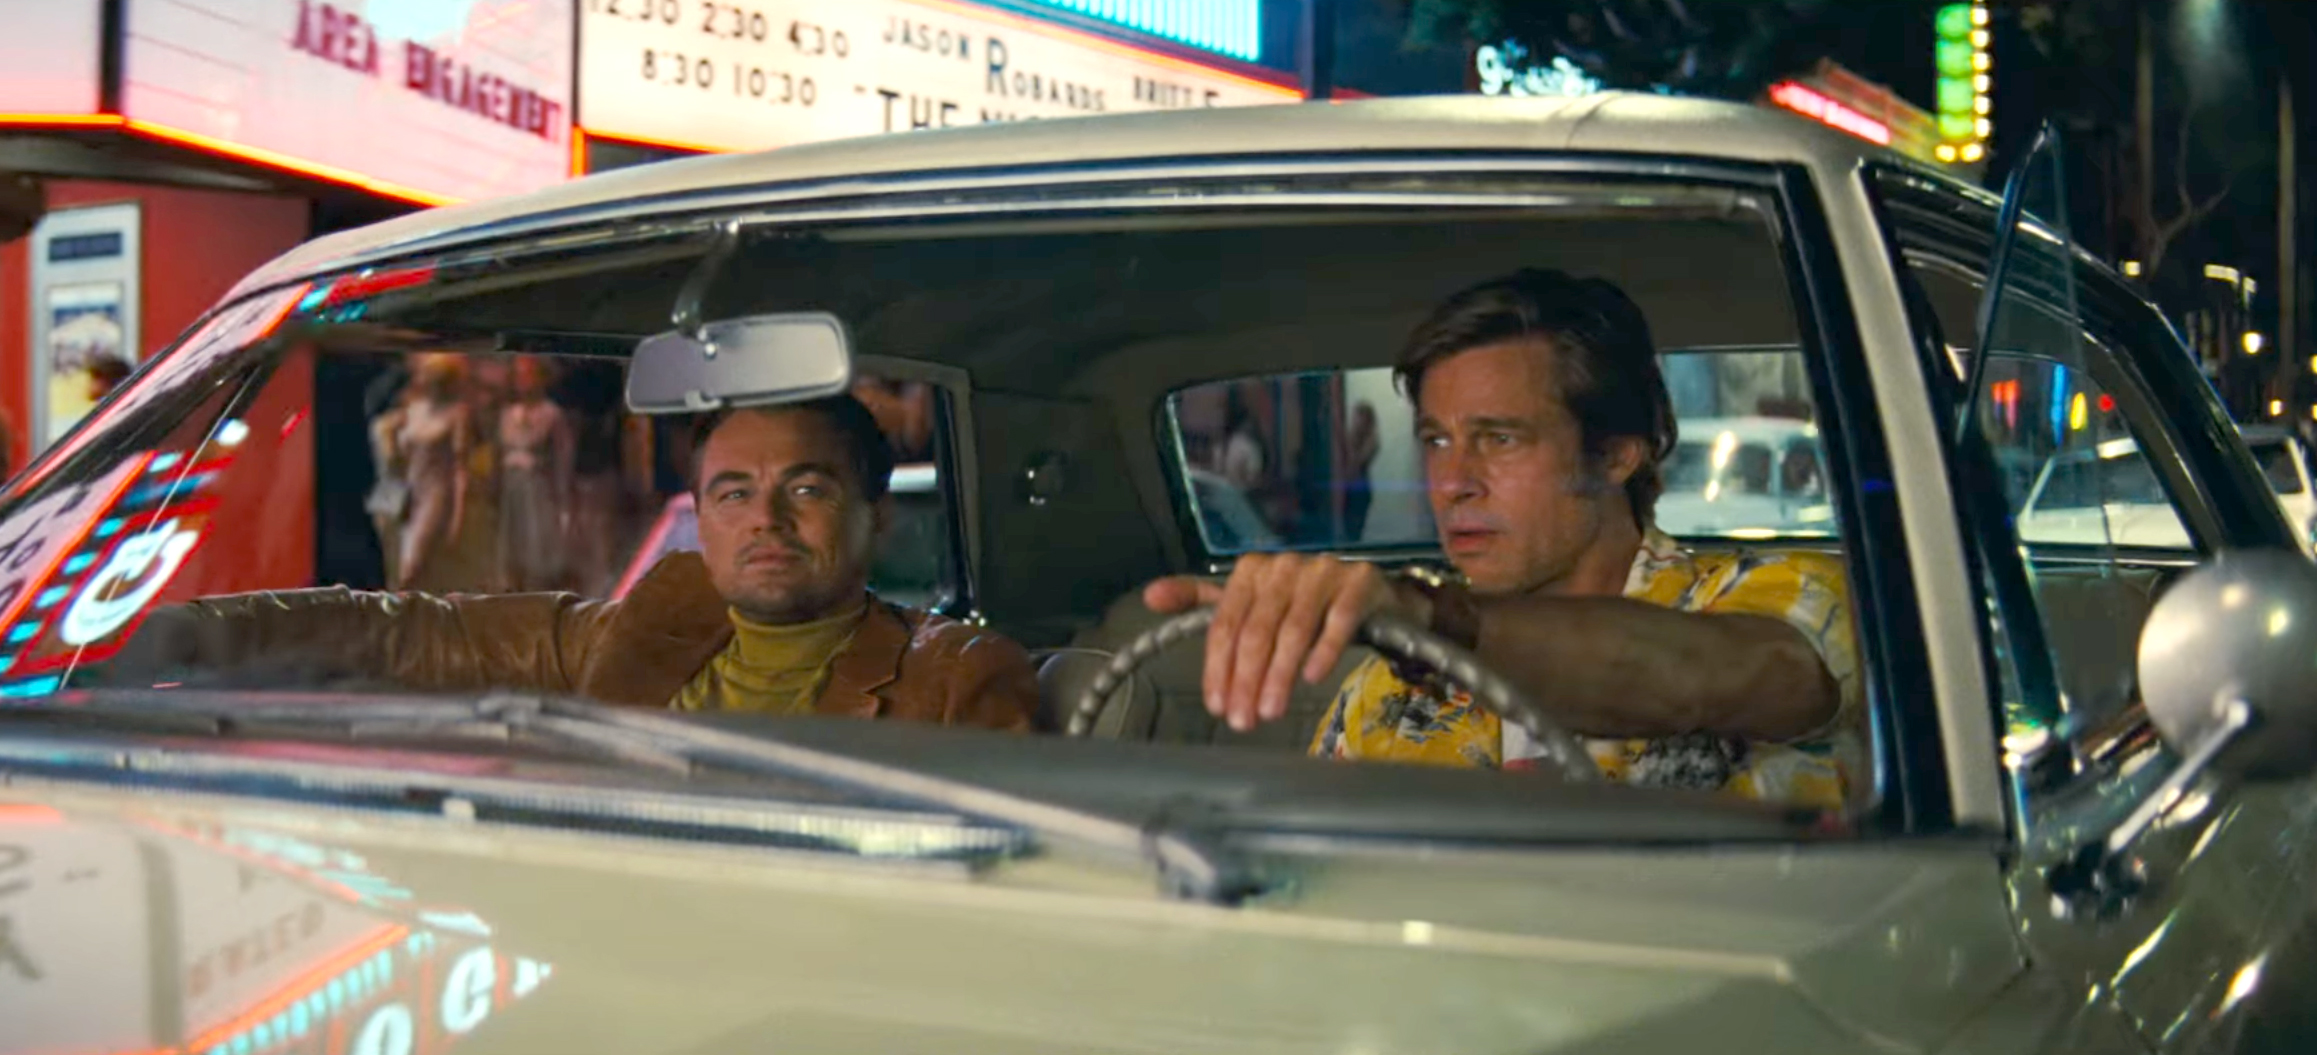 leonardo-dicaprio-and-brad-pitt_s-_once-upon-a-time-in-hollywood_-trailer-2.jpg